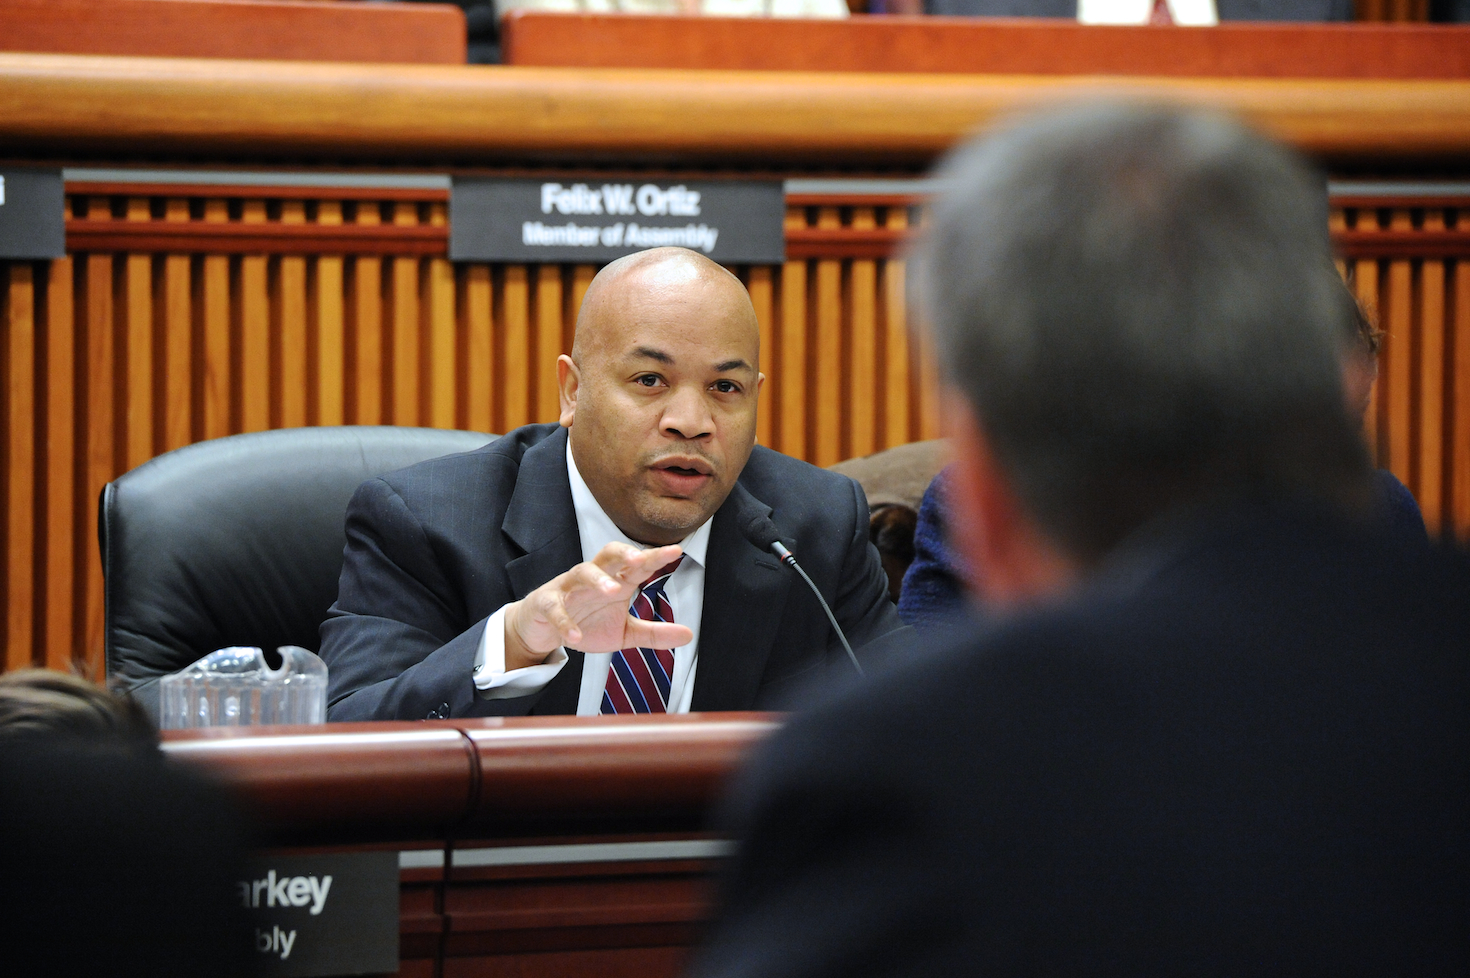 Speaker Heastie questions New York City Mayor Bill De Blasio at a Local Government Budget Hearing